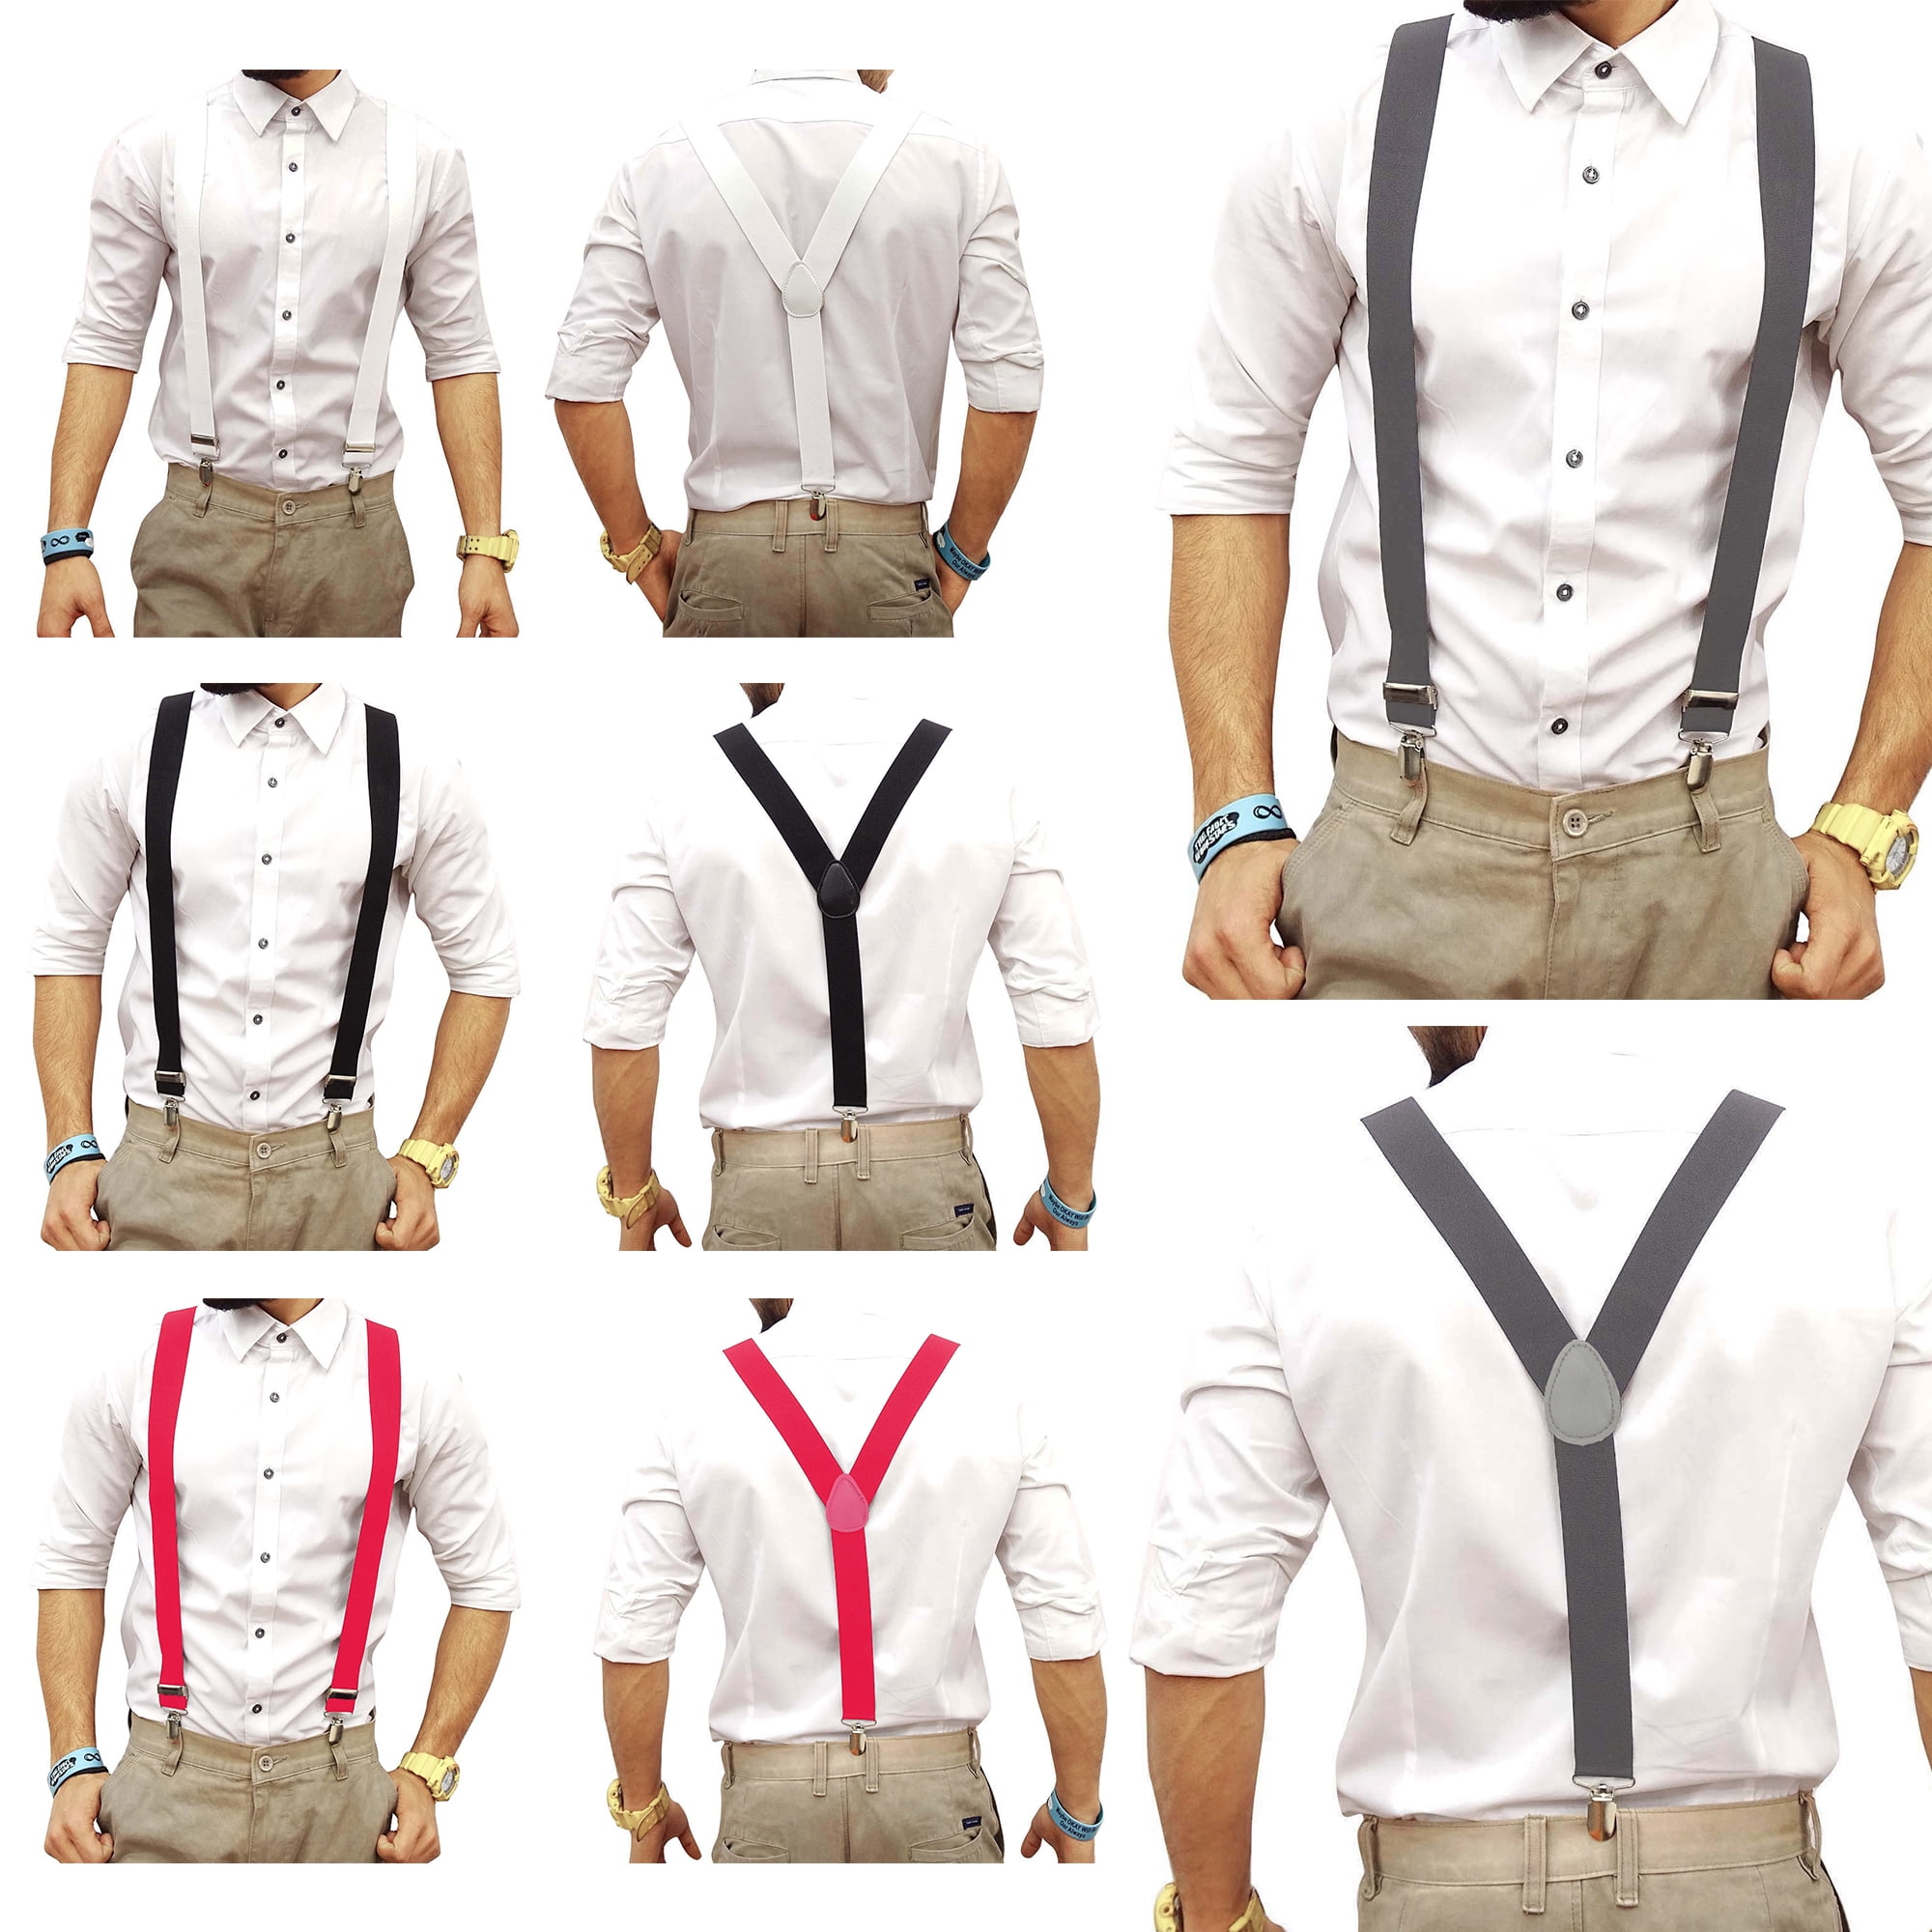 Everything About Braces: Origin of Clip-on Suspenders